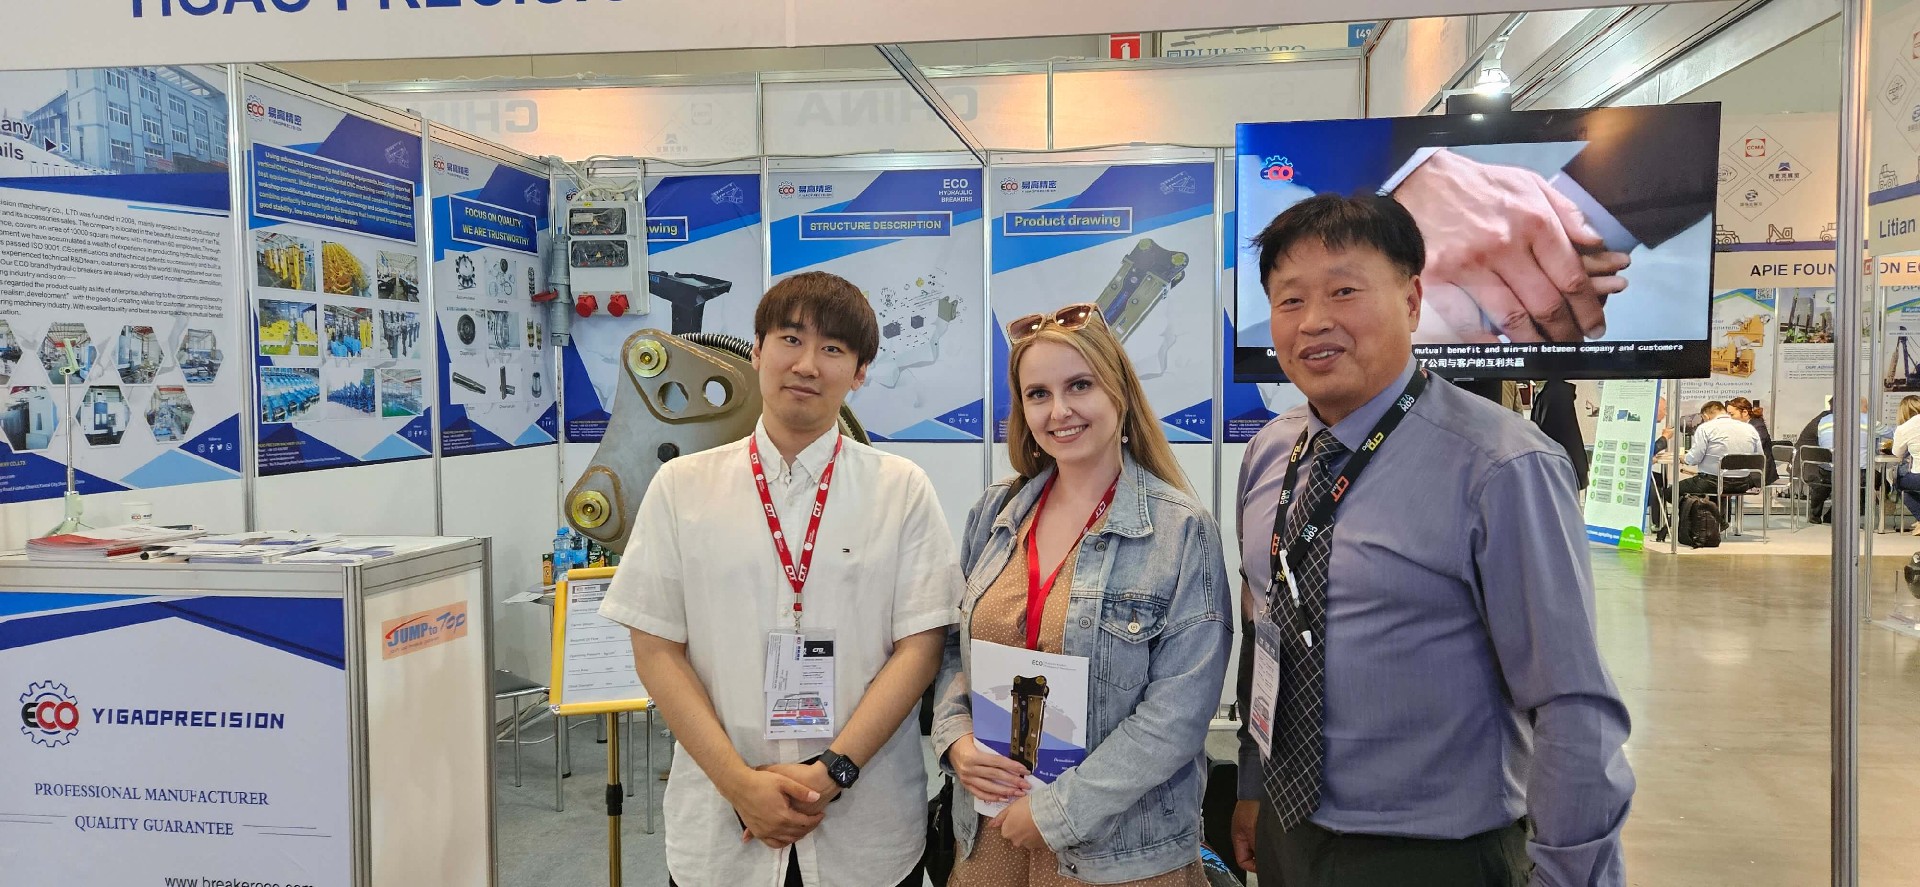 Yantai Yigao Precision Machinery leads the global influence and displays hydraulic breakers at international exhibitions